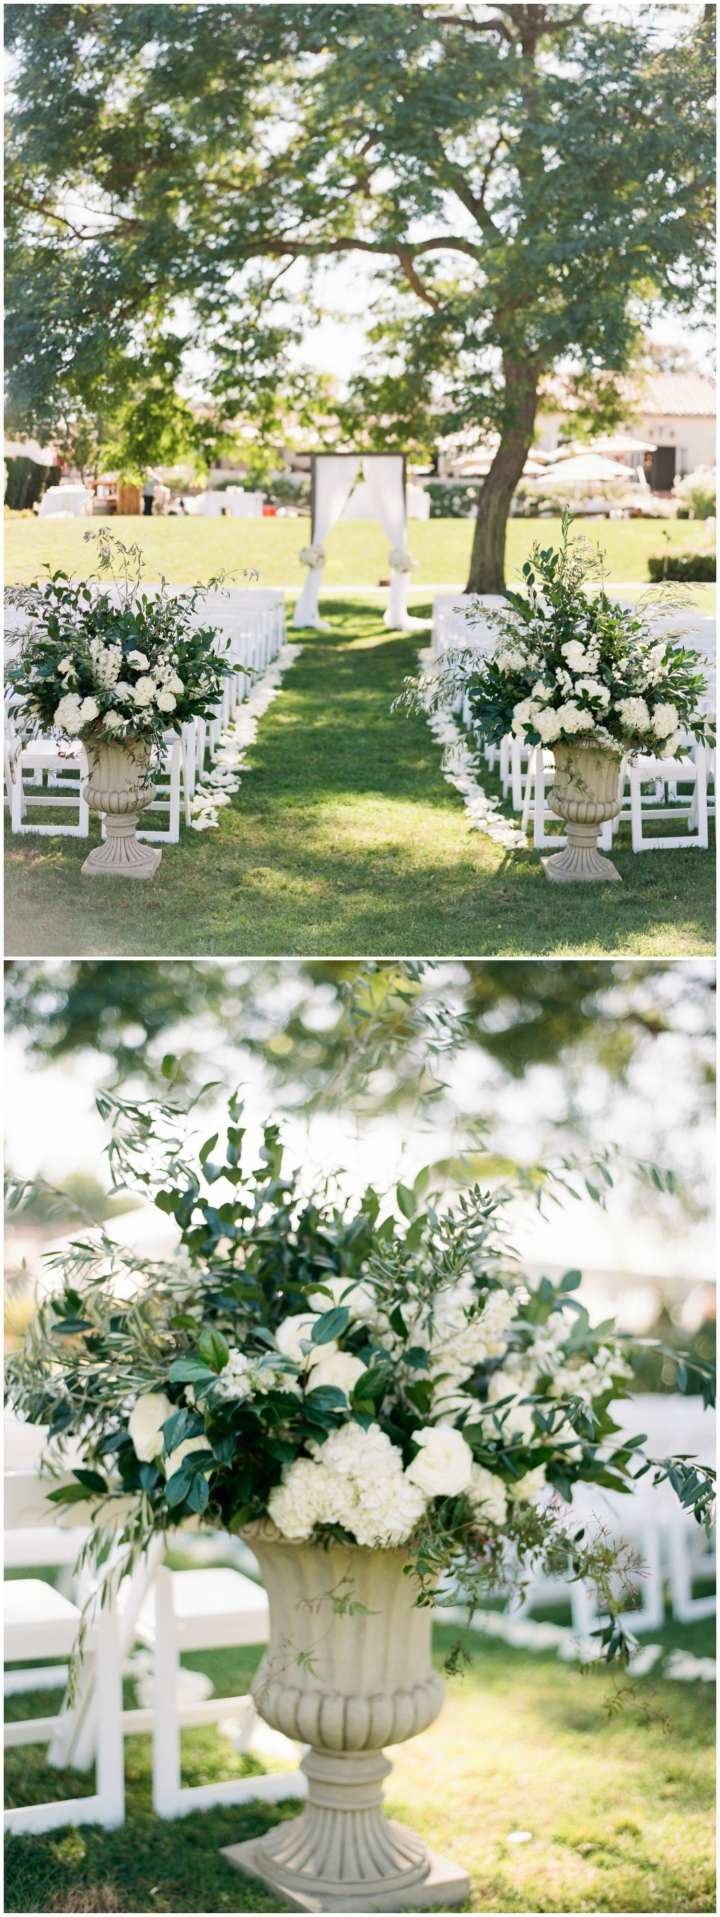 24 Lovely Rose Vase Ideas 2022 free download rose vase ideas of outdoor wedding ceremony lovely vases disposable plastic single regarding outdoor wedding ceremony awesome the smarter way to wed wedding ceremony ideas pinterest of outdo